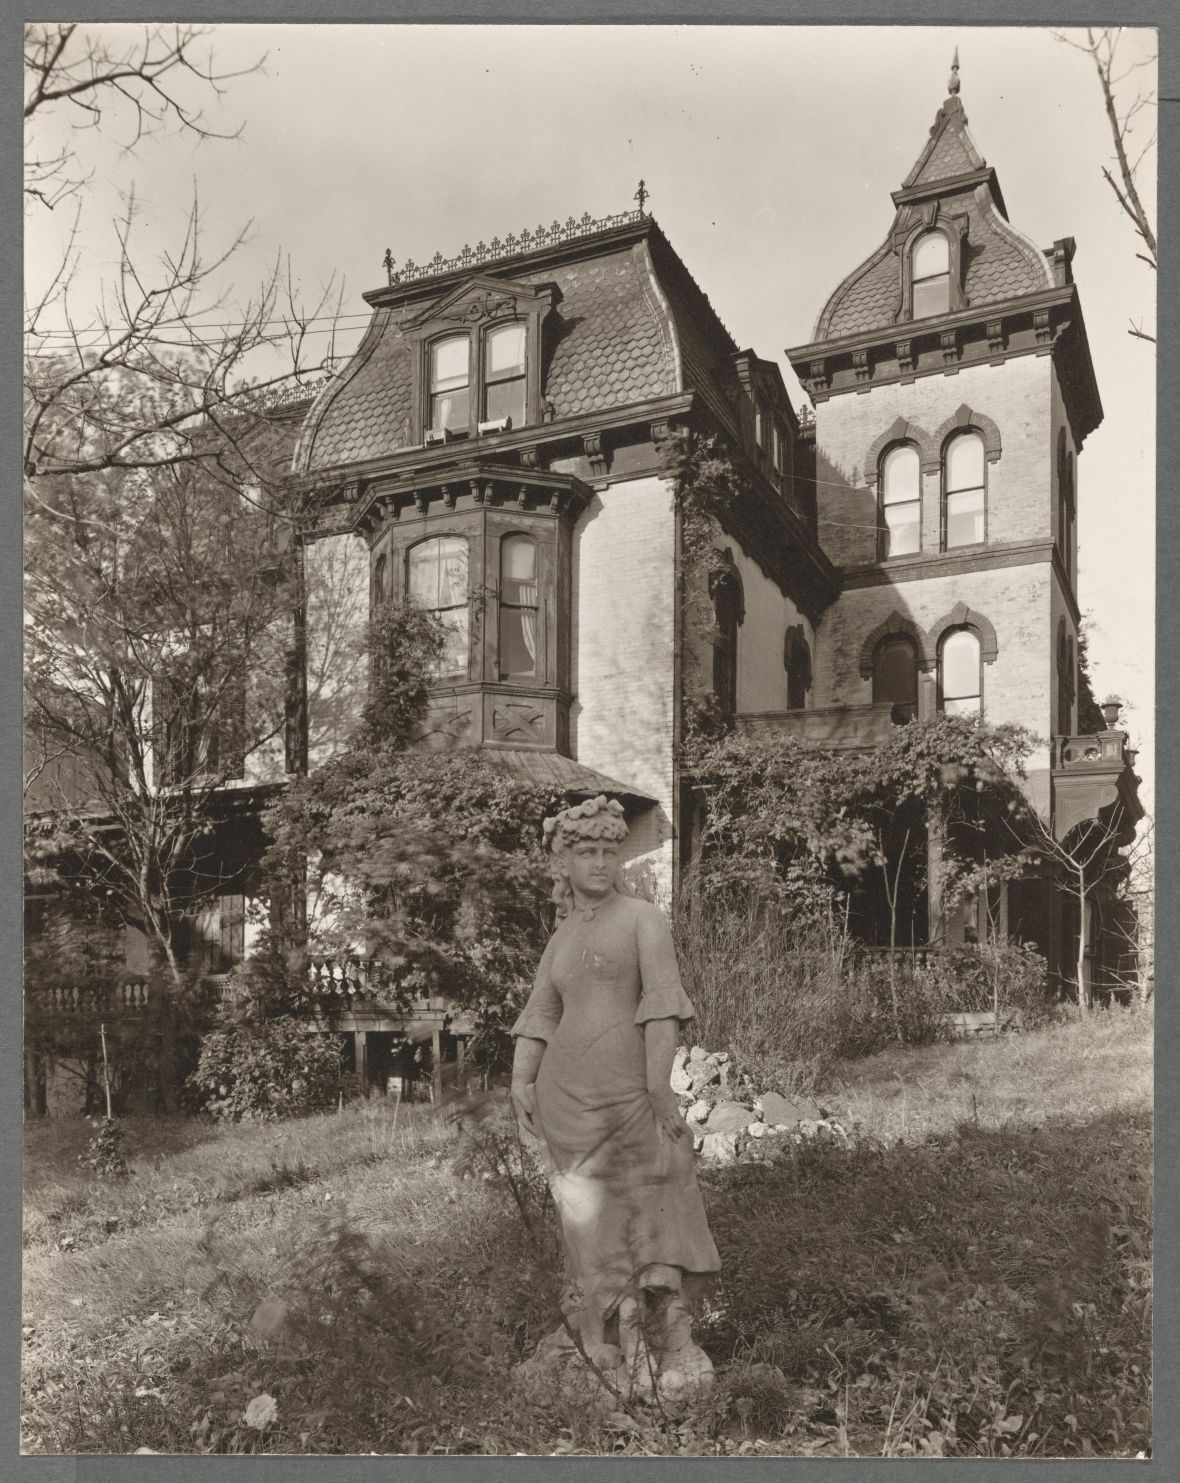 Wheelock Mansion, 661 West 158th Street, 1930s (Courtesy of the NYPL)